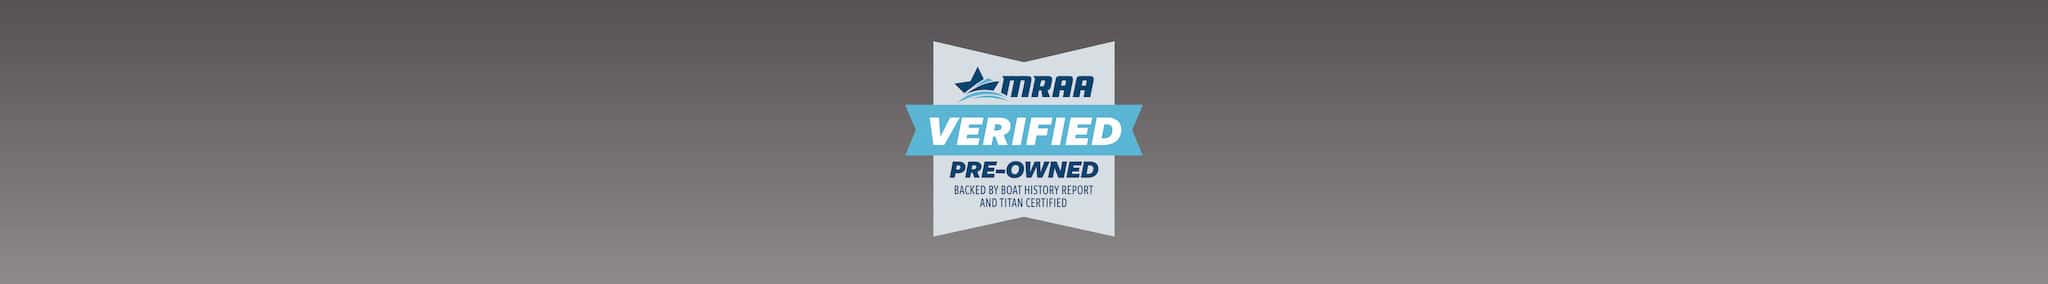 MRAA Verified Pre-Owned Boat Program banner